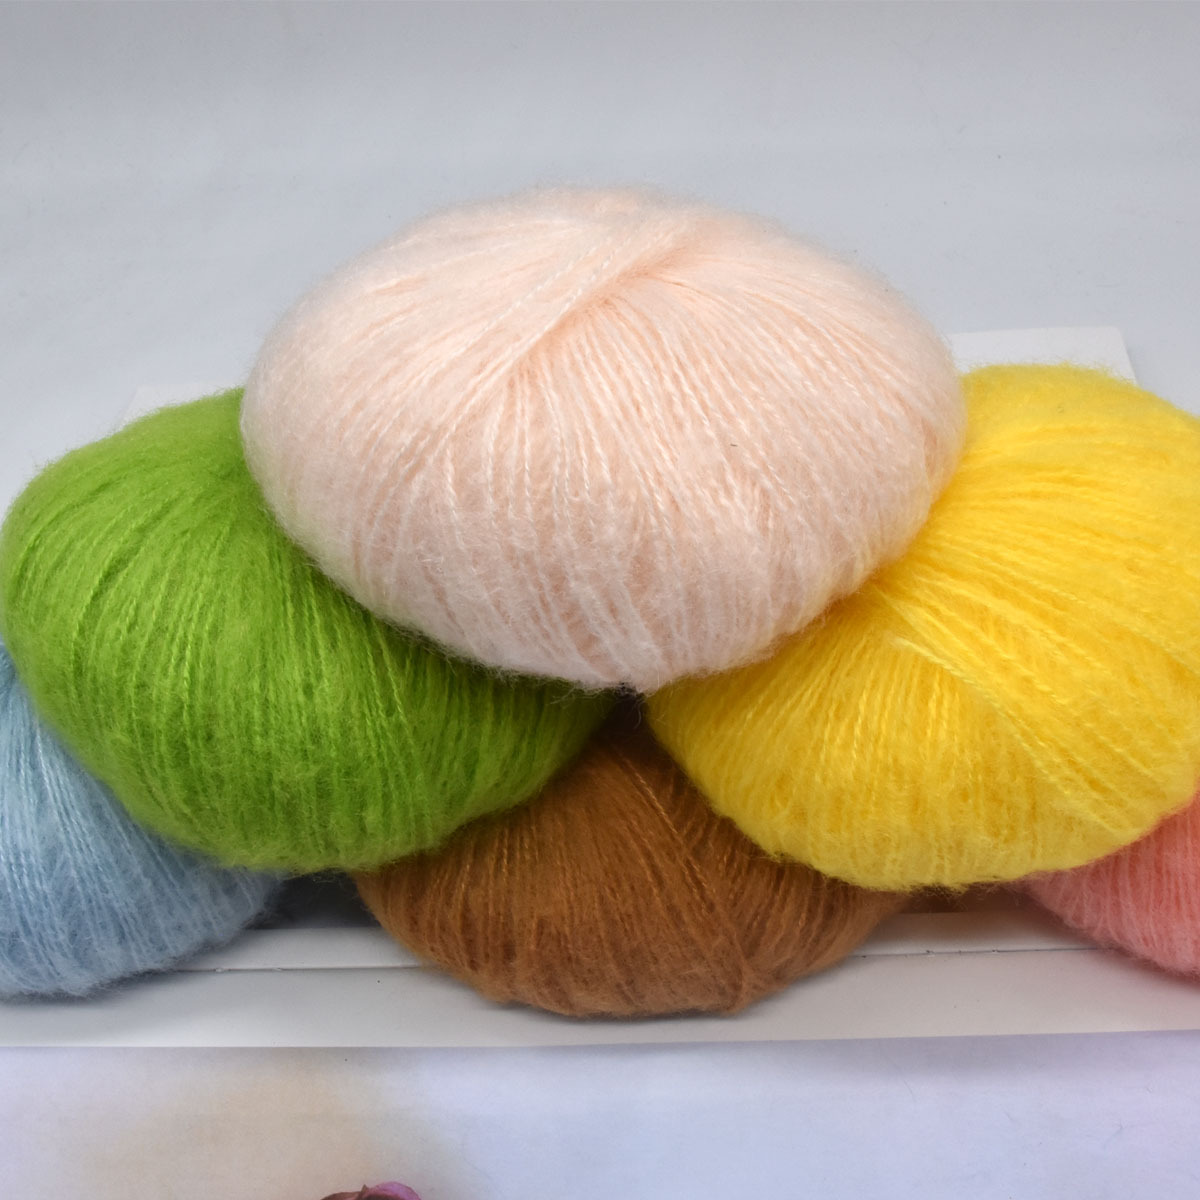 1pc Beige 50g Soft Skin-friendly Cashmere Yarn, Diy Knitting Material For  Handmade Autumn/winter Sweater, Scarf. Soft, Lightweight, Warm,  Comfortable, Smooth, Full Of Color And Shine, Together With 20g Of  Complementary Yarn. Approximately